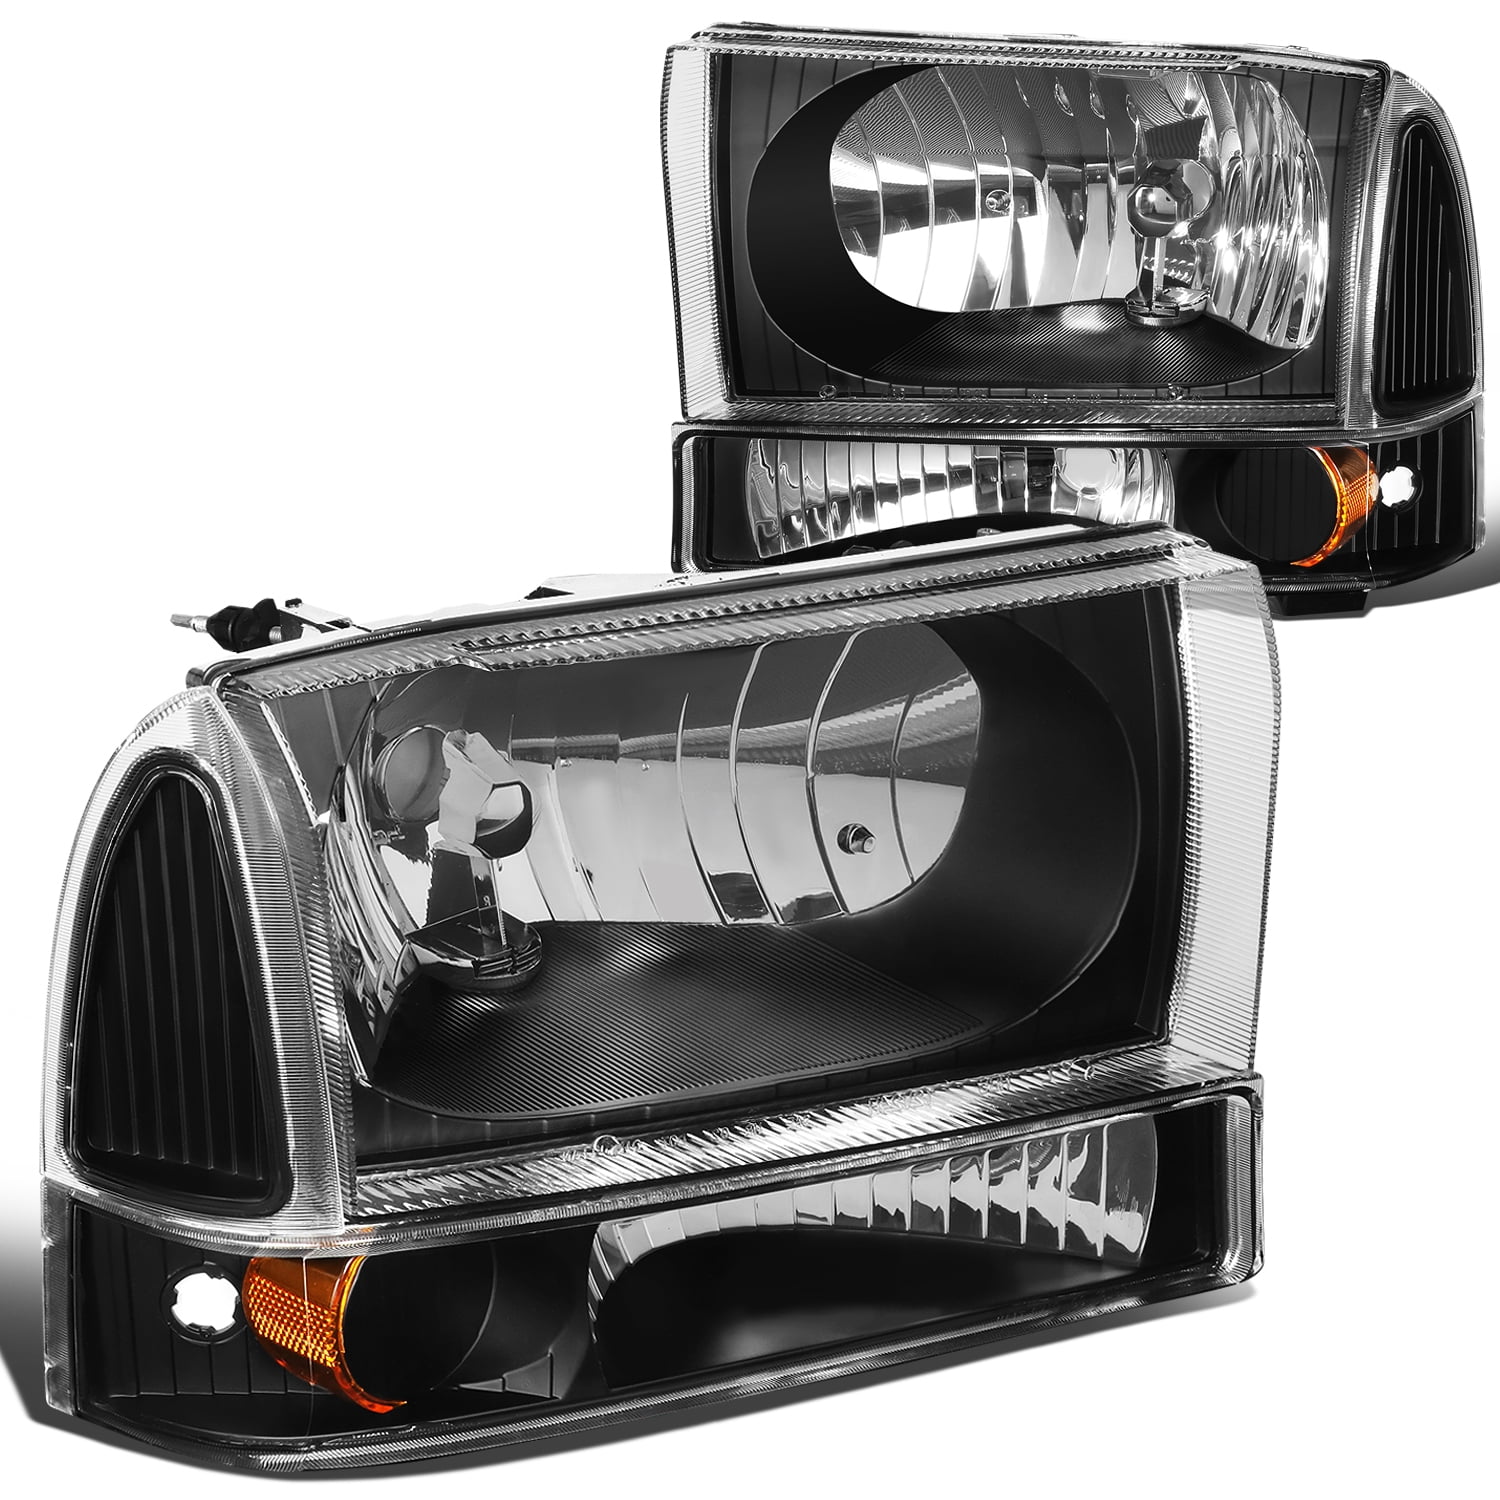 DNA Motoring HL-OH-F99SD4P-BK-CL1 Black Housing Headlights Replacement For 99-04 F250 F350 F450 F550 SD 